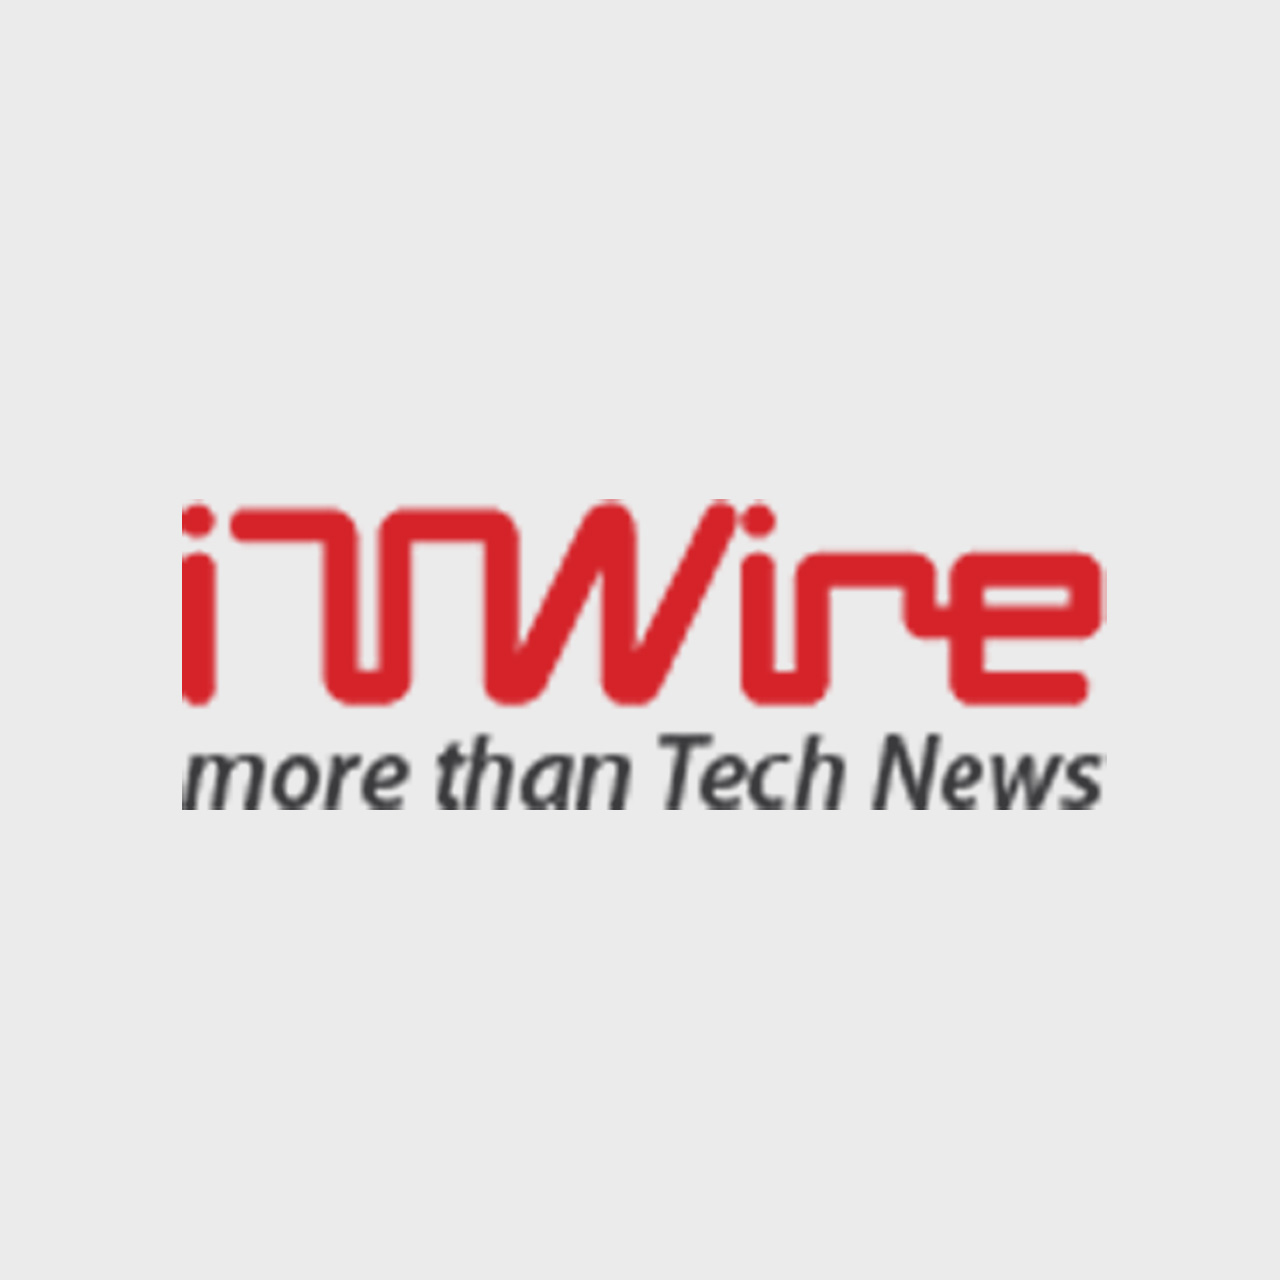 itwire1.jpg